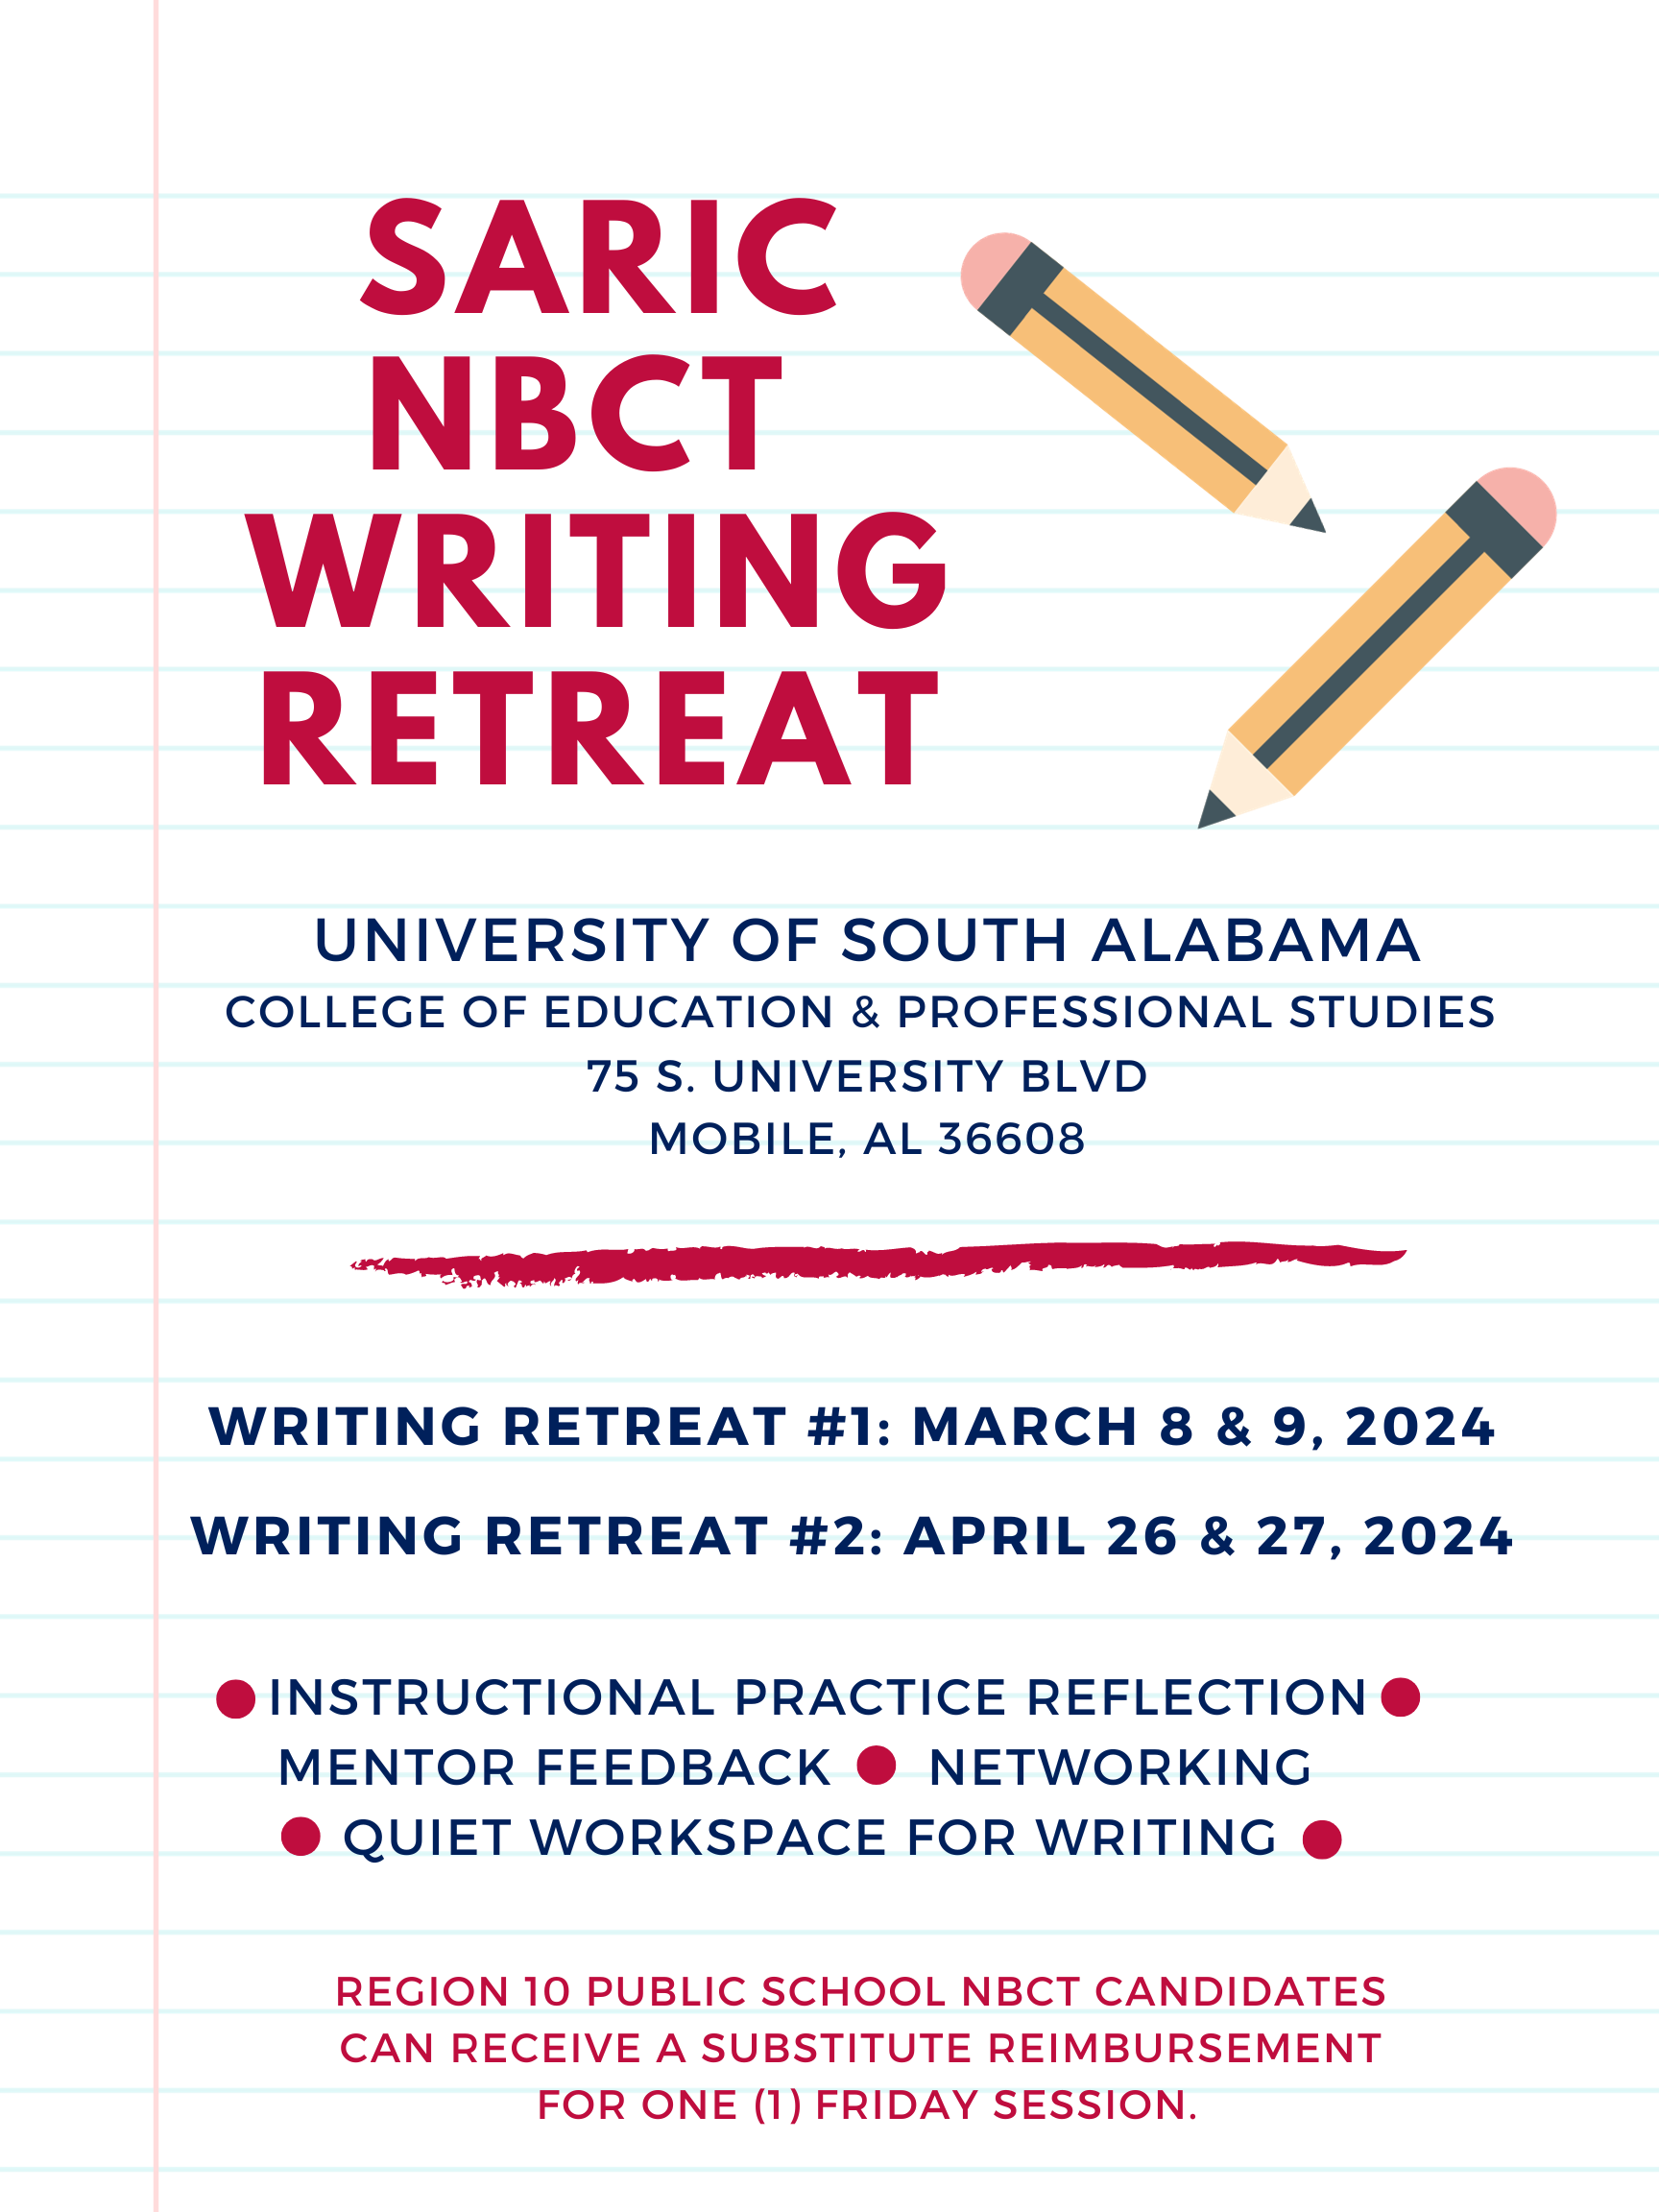 Event Name: SARIC NBCT Writing Retreat
Location: University of South Alabama College of Education and Professional Studies 75 S University Blvd., Mobile, AL 36608

Writing Retreat #1: March 8-9
Writing Retreat #2: April 26-27

Services offered: instructional practice reflection, mentor feedback, networking, quite writing workspace

Region 10 Public School NBCT candidates can receive a substitute reimbursement for one (1) Friday session.